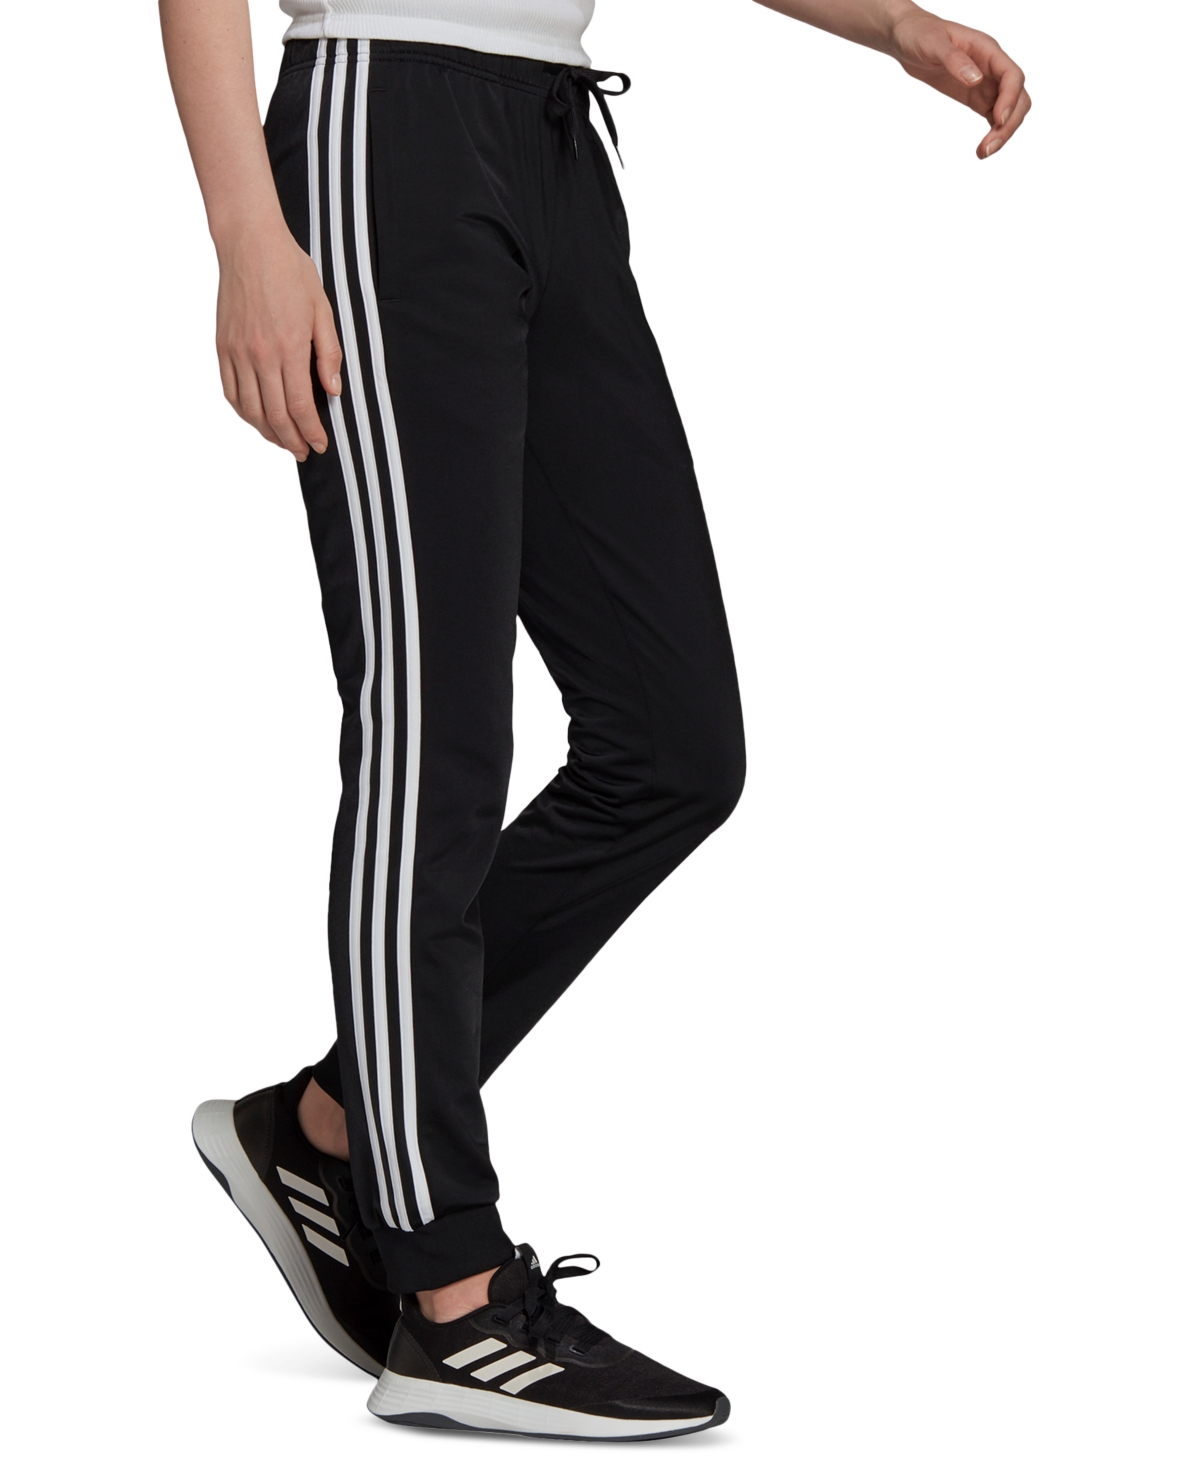  adidas Women's Essentials Warm-Up Tapered 3-Stripes Track Pants